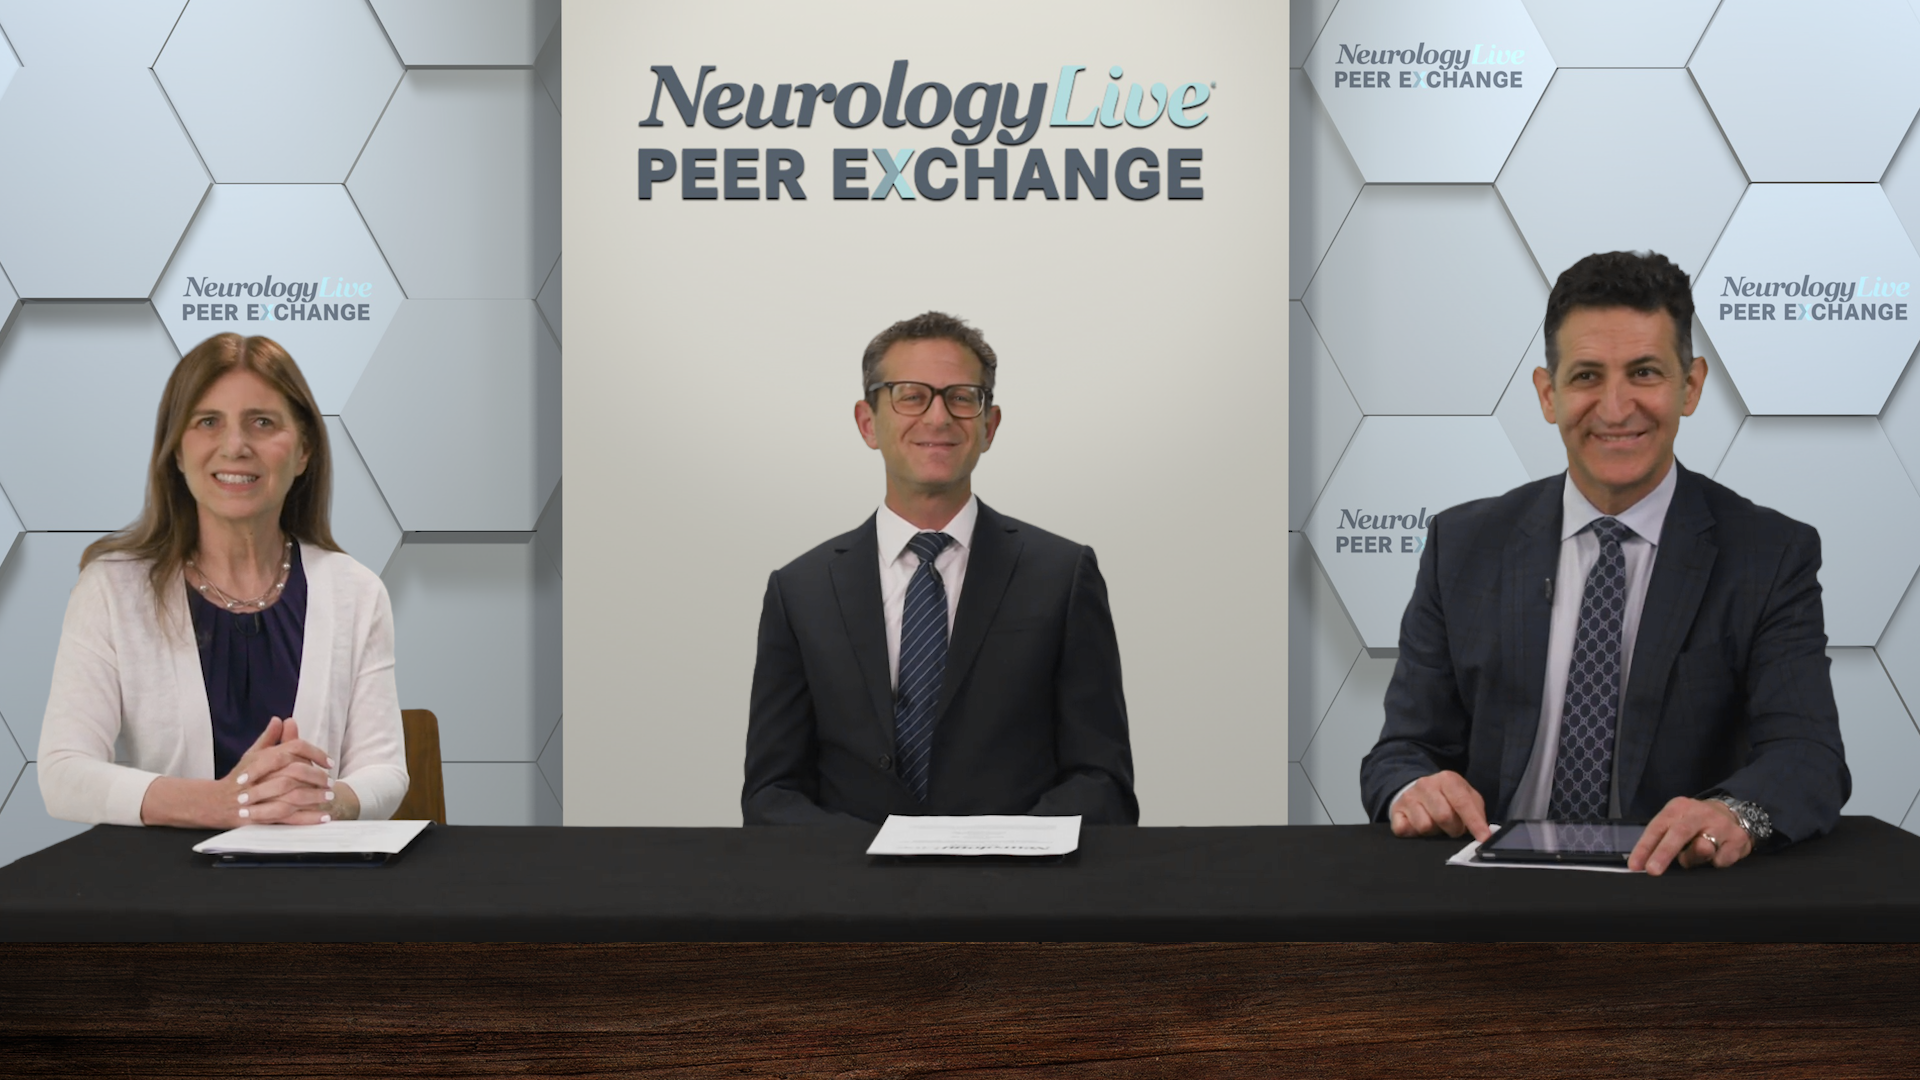 A panel of 3 experts on Alzheimer's disease